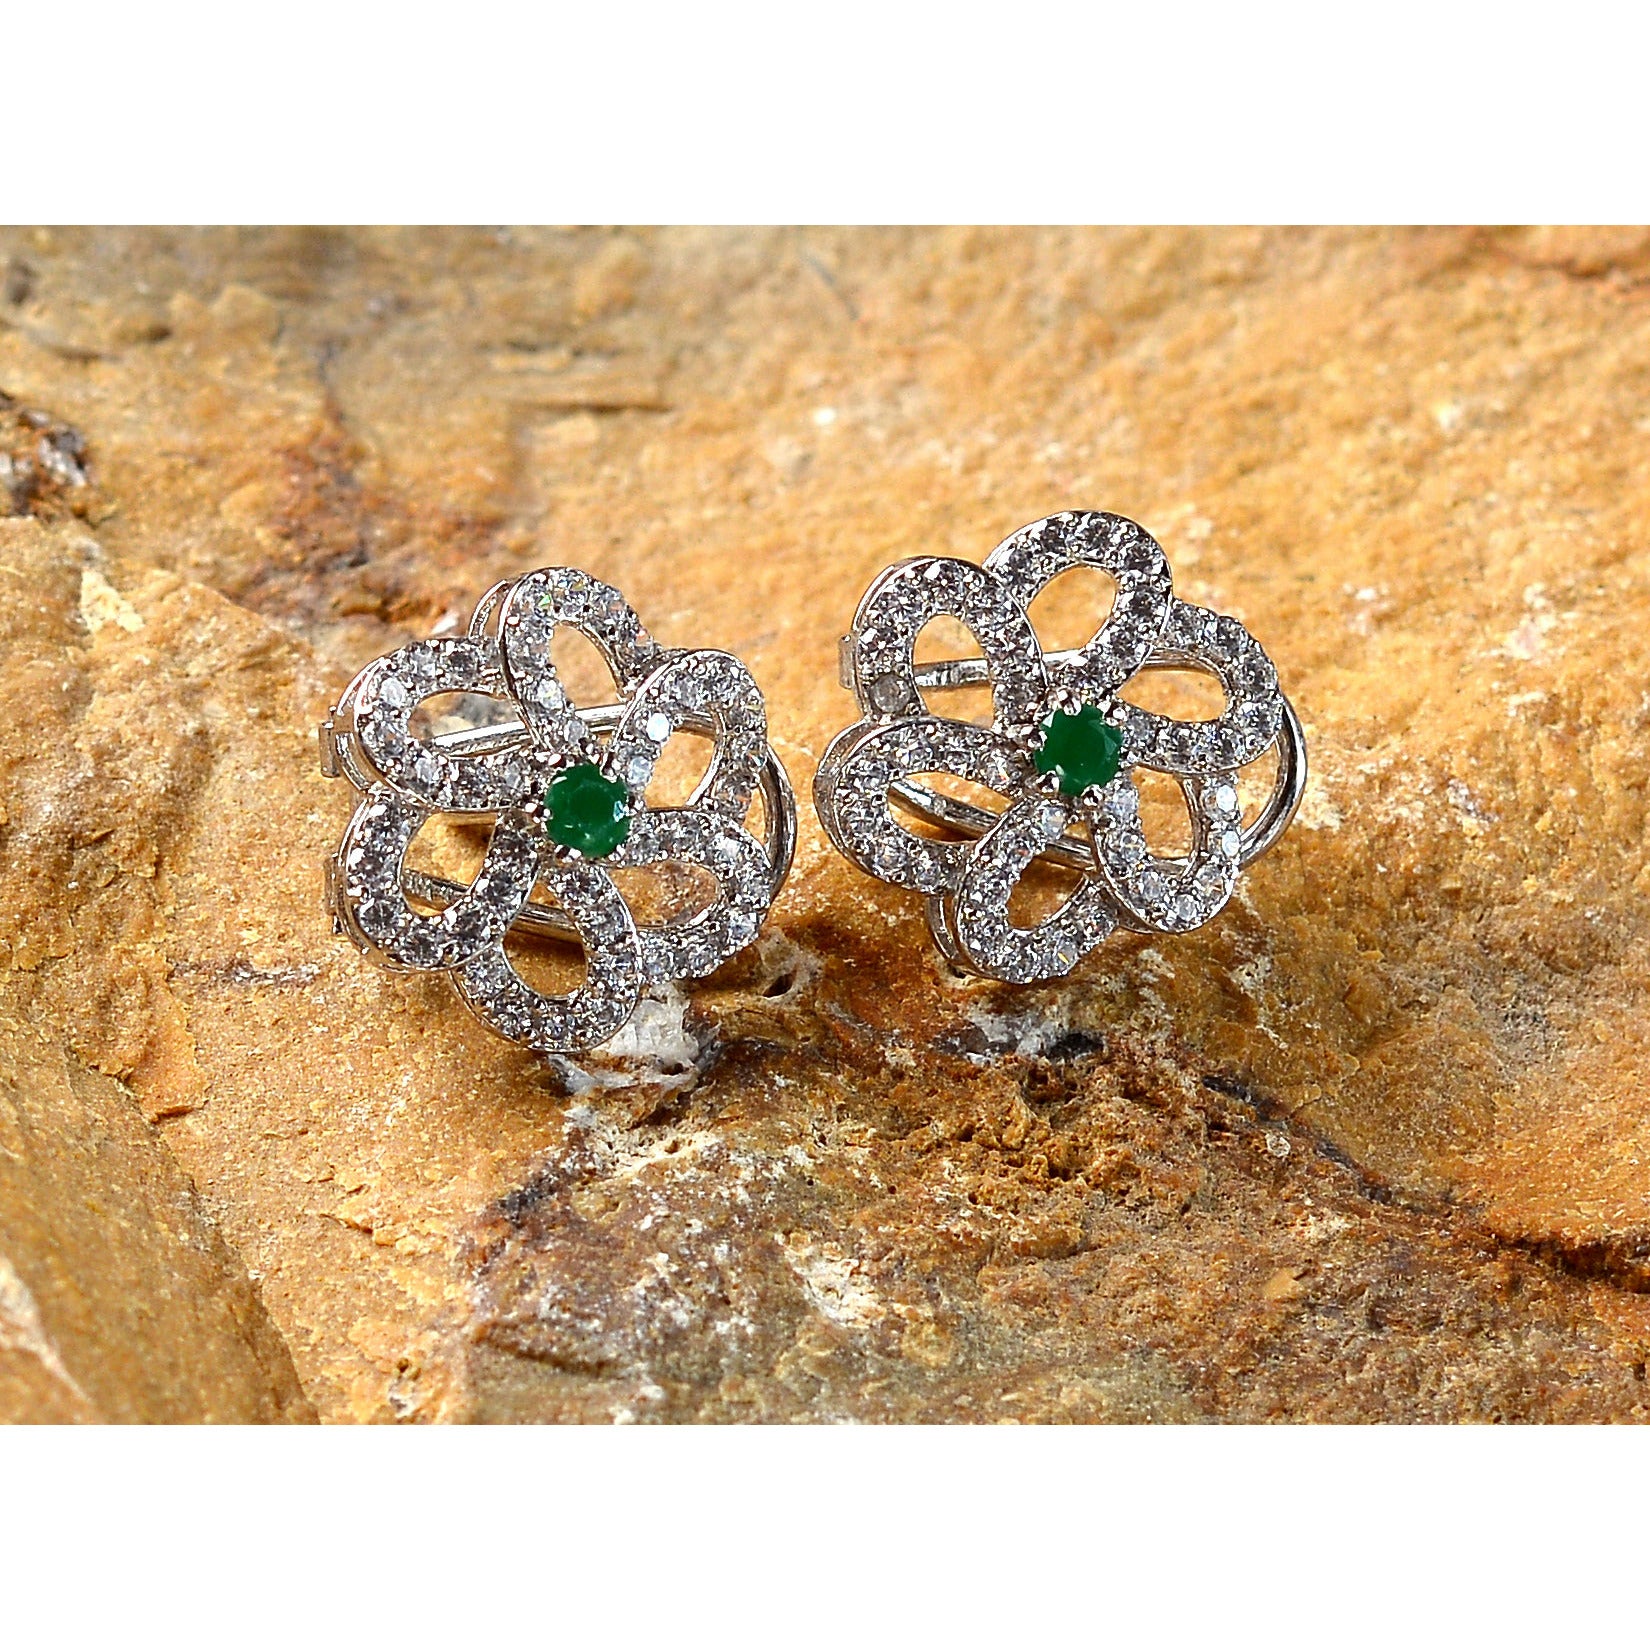 Saqafat Floral Earrings with Green Stone